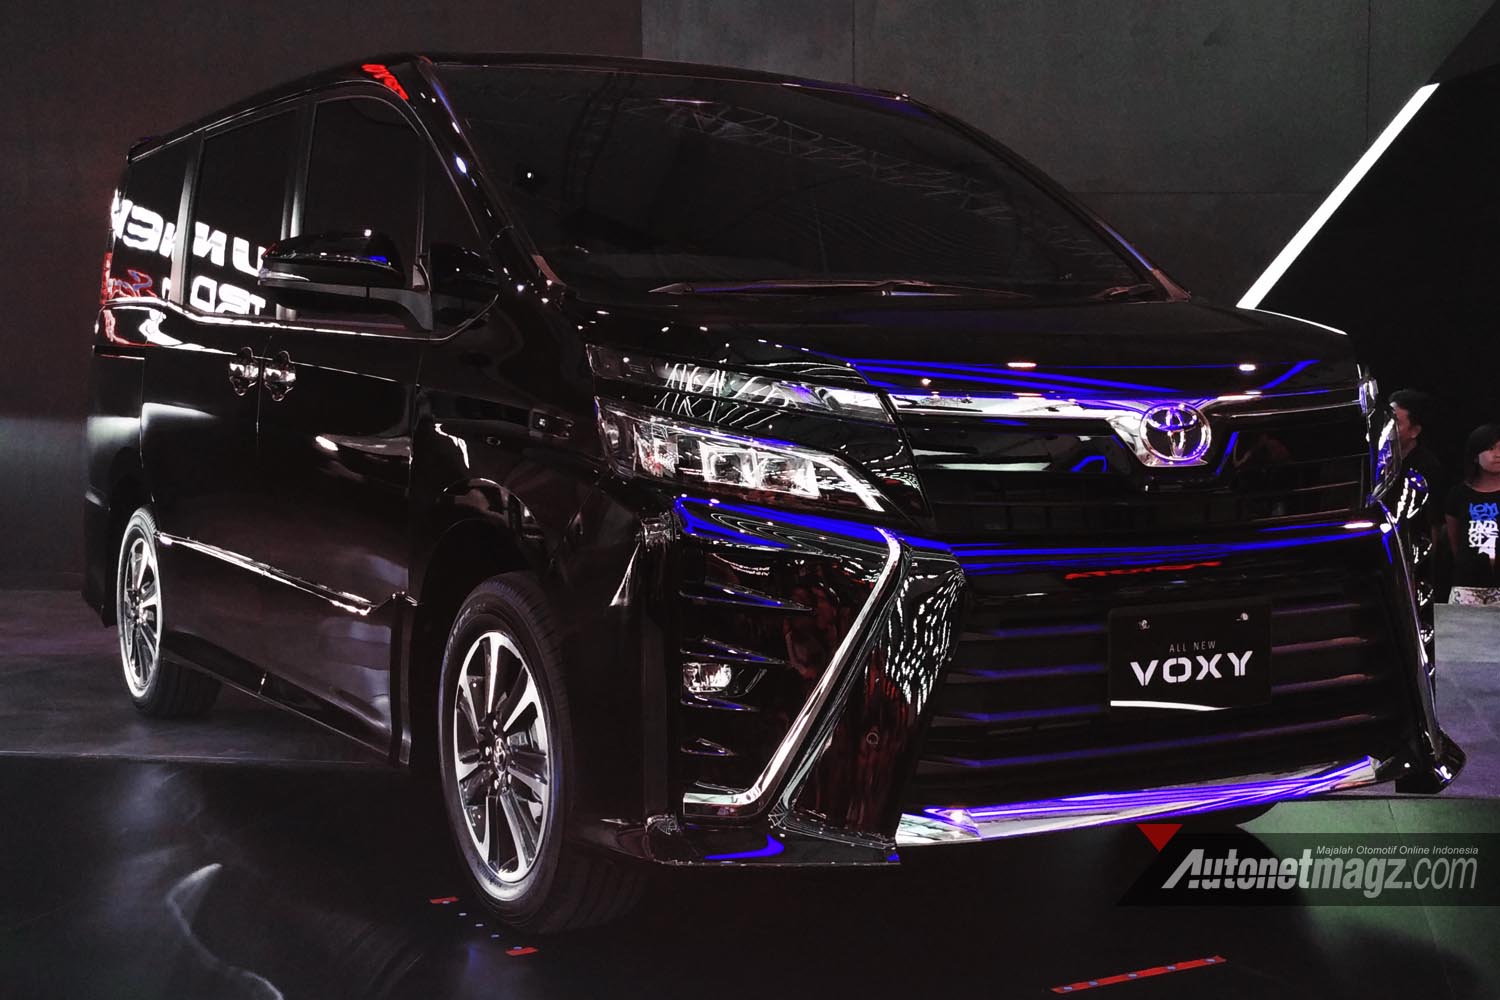 Mobil Baru, review toyota voxy indonesia: First Impression Review Toyota Voxy 2017 Indonesia